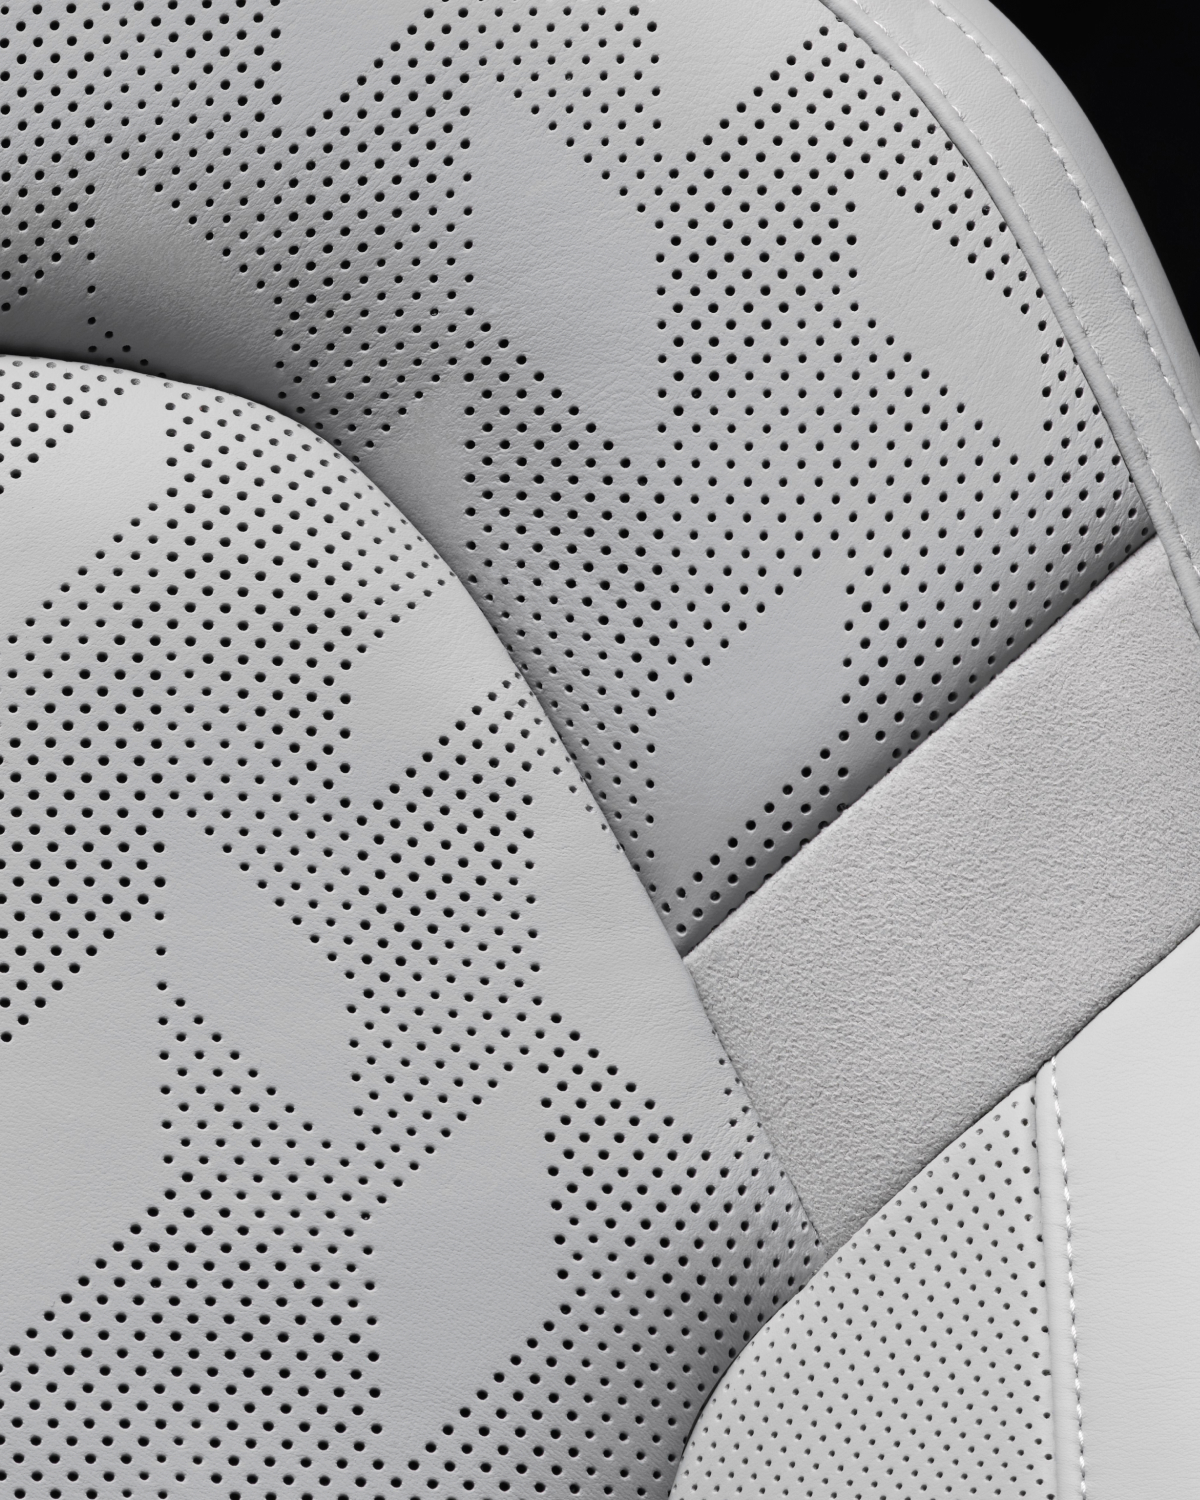 close-up on the light Nappa leather seat and yellow belts.